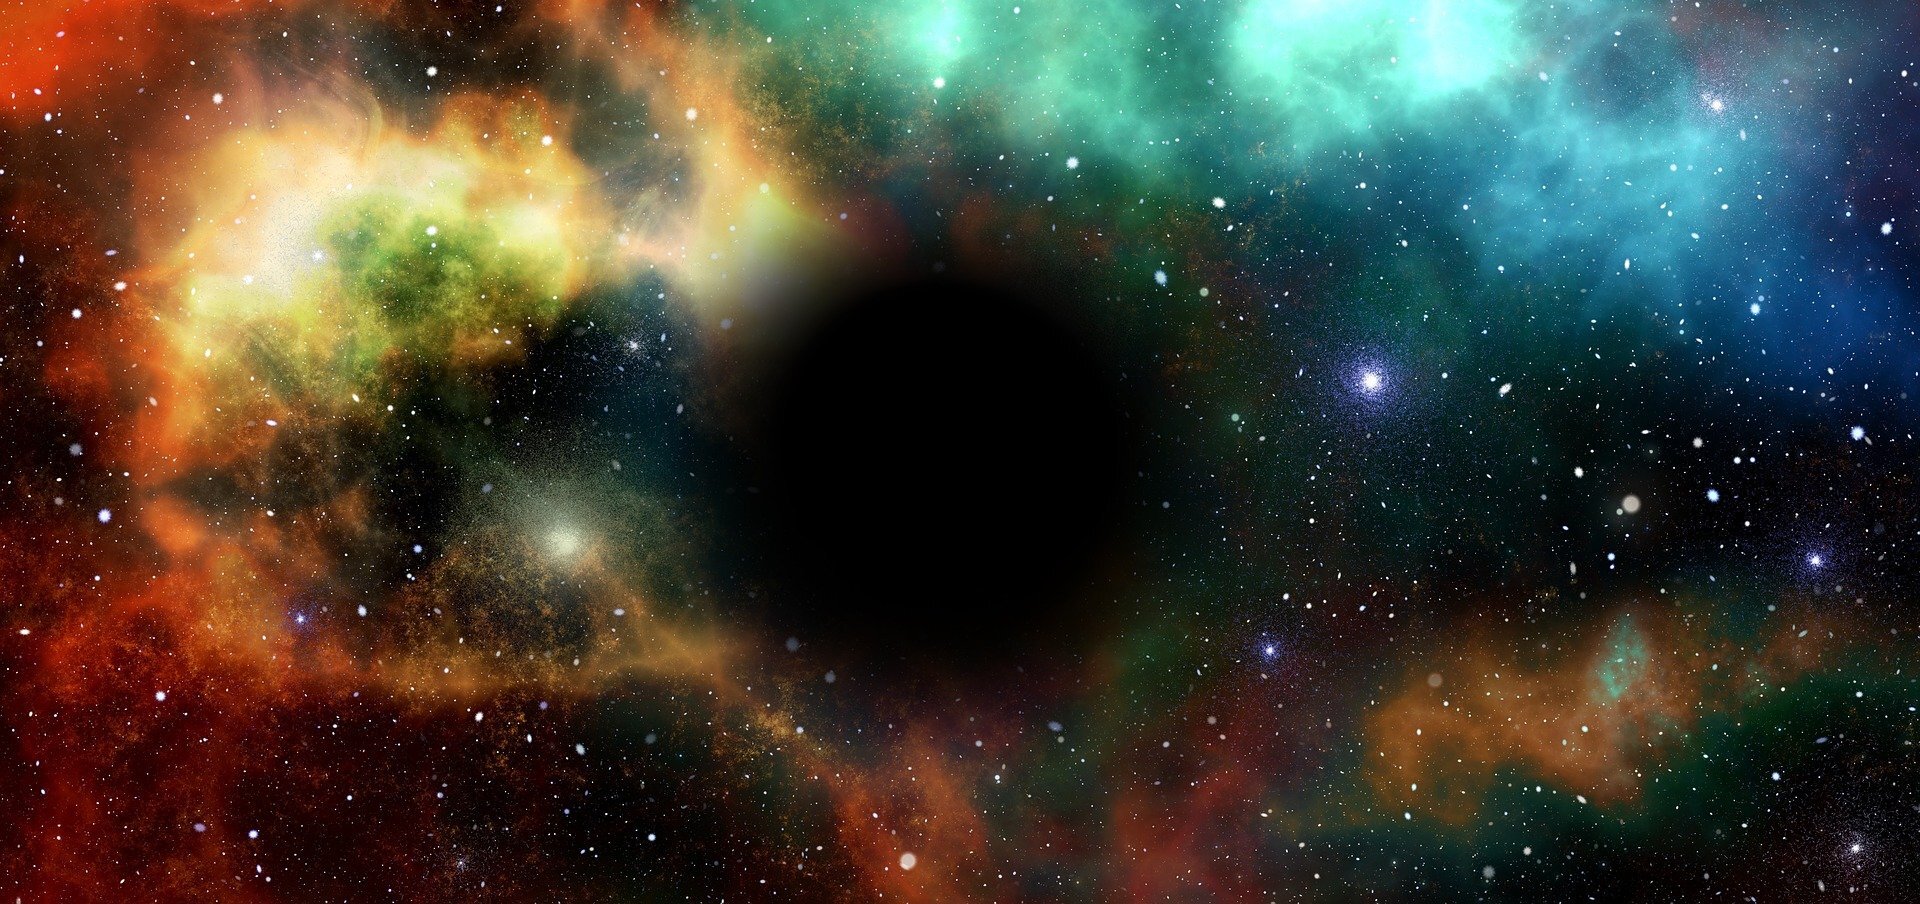 New analysis reveals a tiny black hole repeatedly punching through a larger black hole's disk of gas